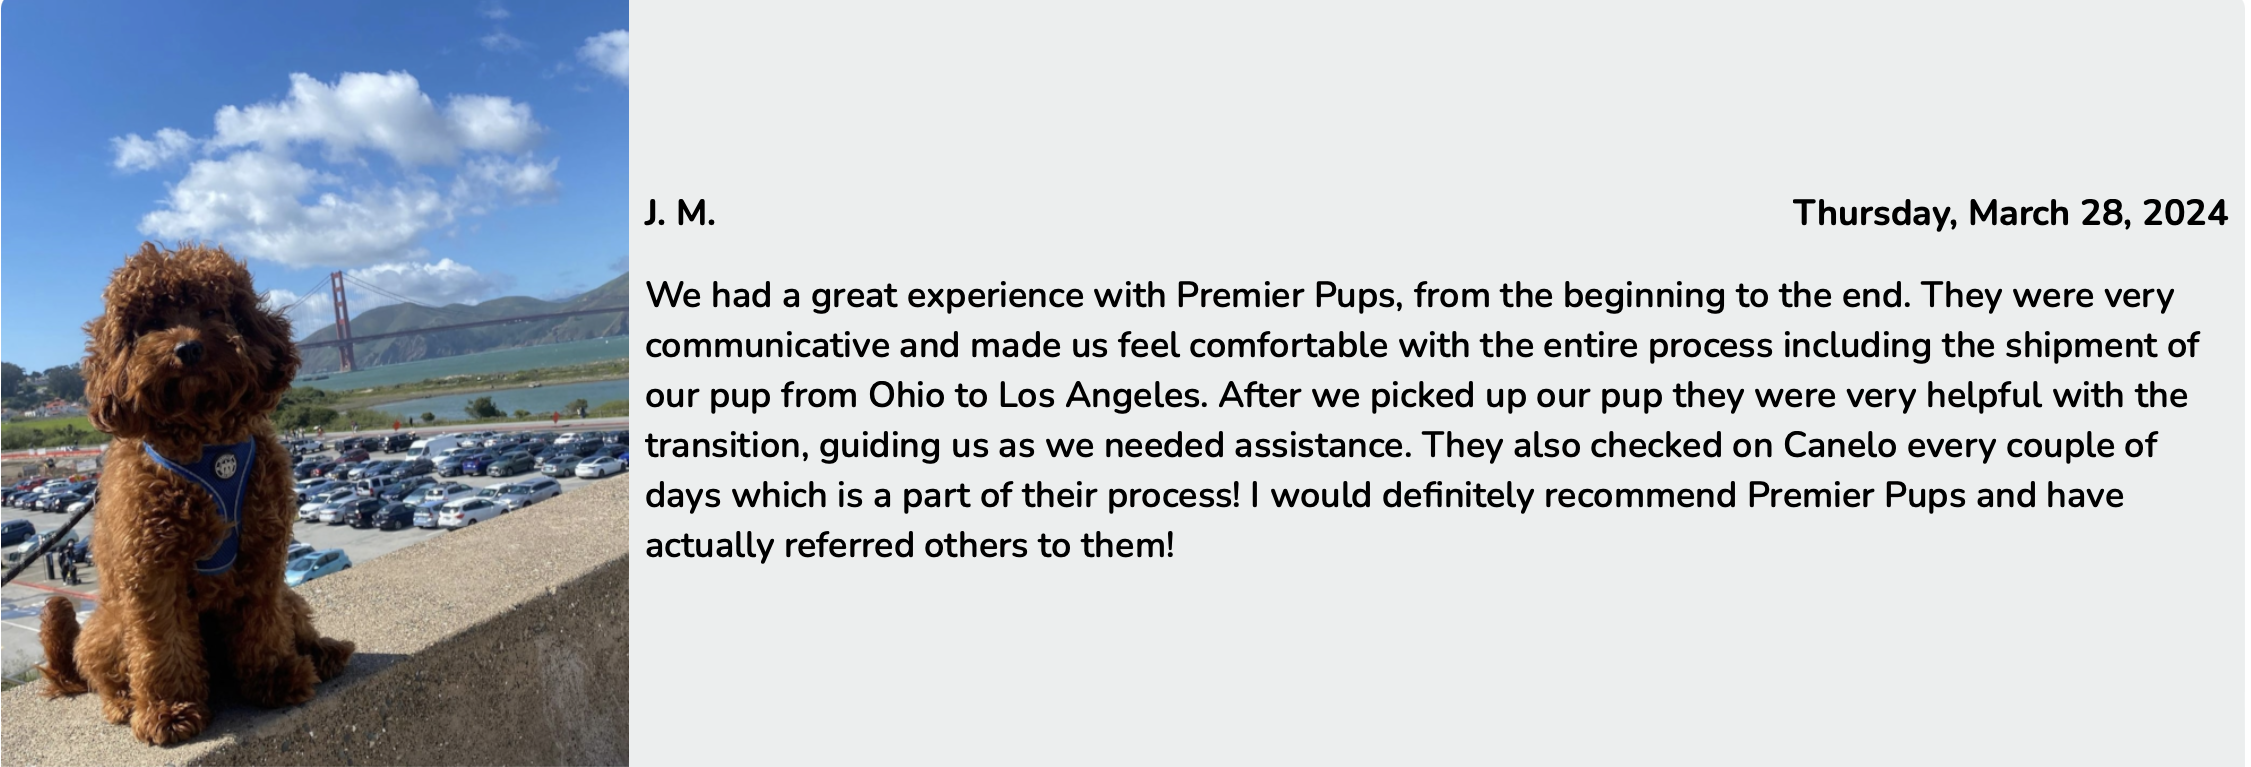 Premier Pups Customer Review for Cavapoo puppy